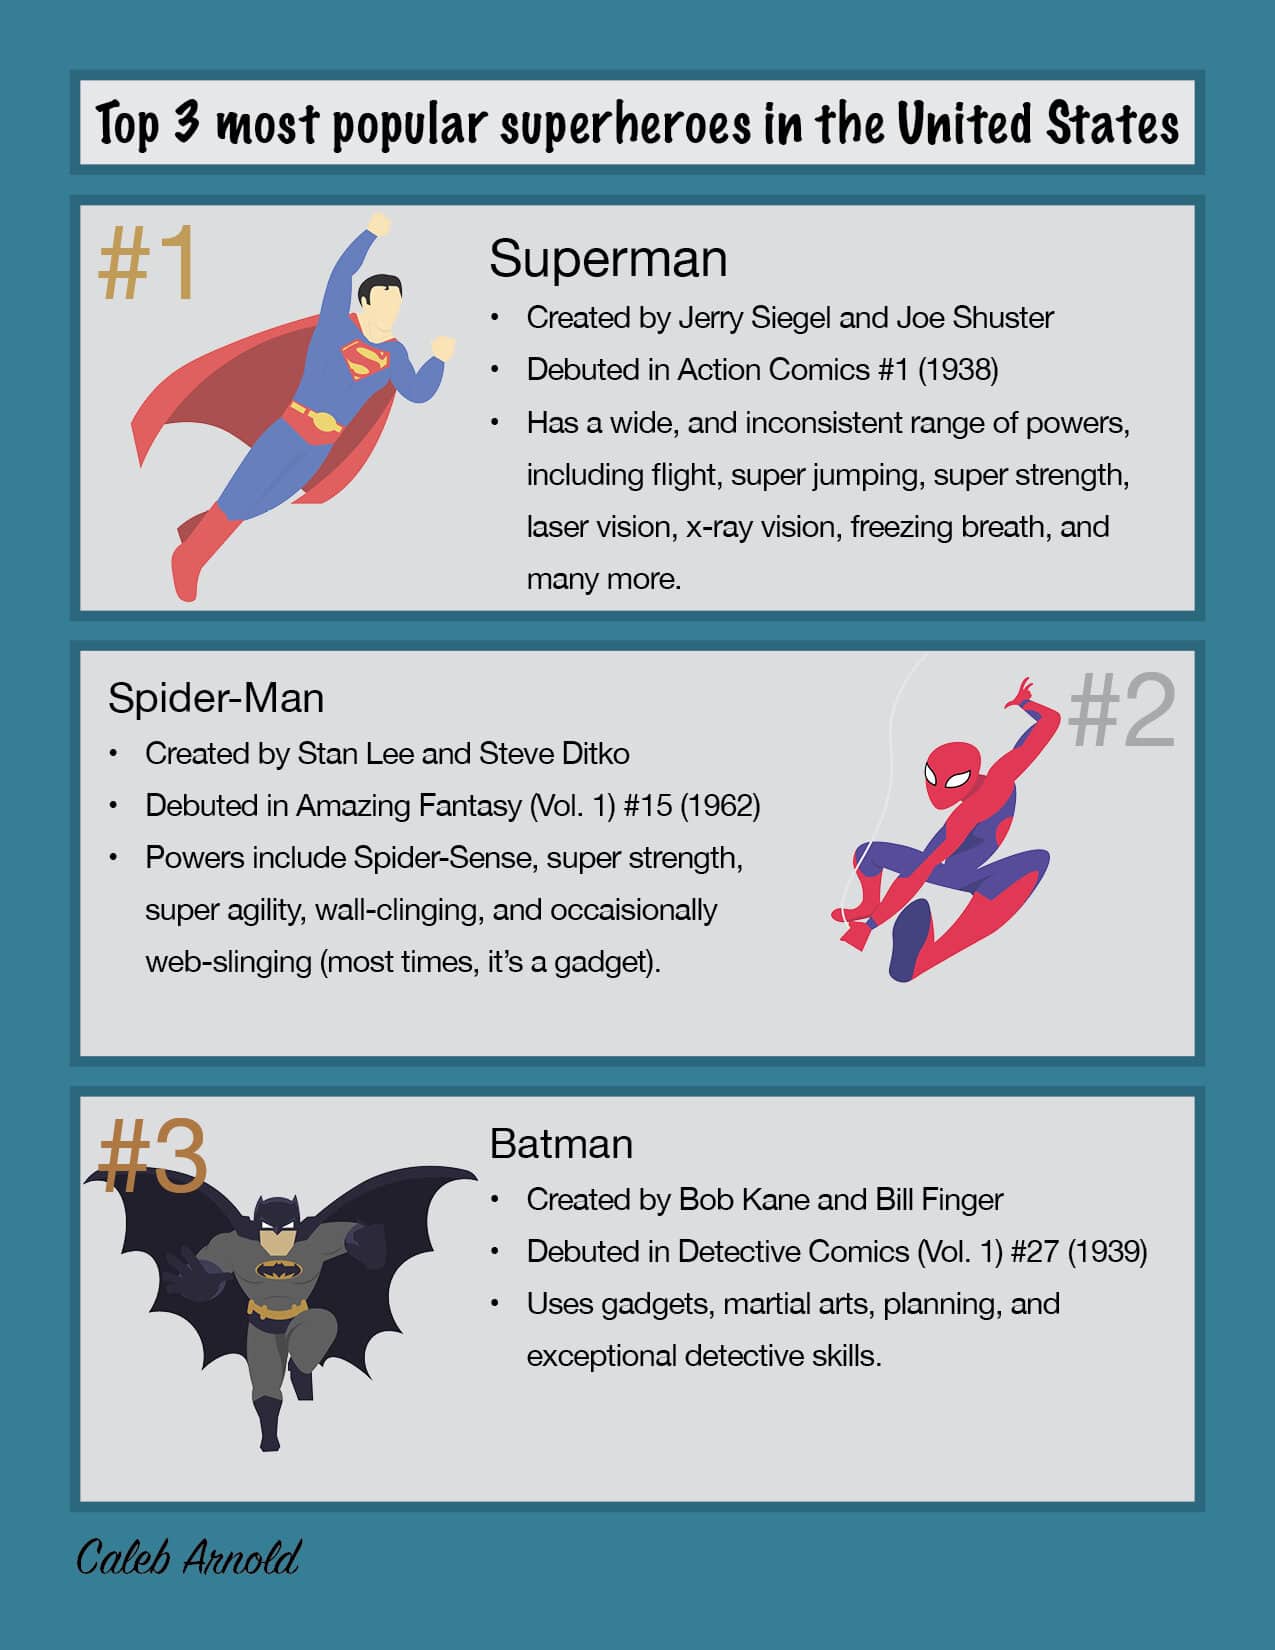 Superheroes have been culturally significant in the United States for a while, and these are the best of the best.Sources: superheroes.fandom.com, newsarama.com